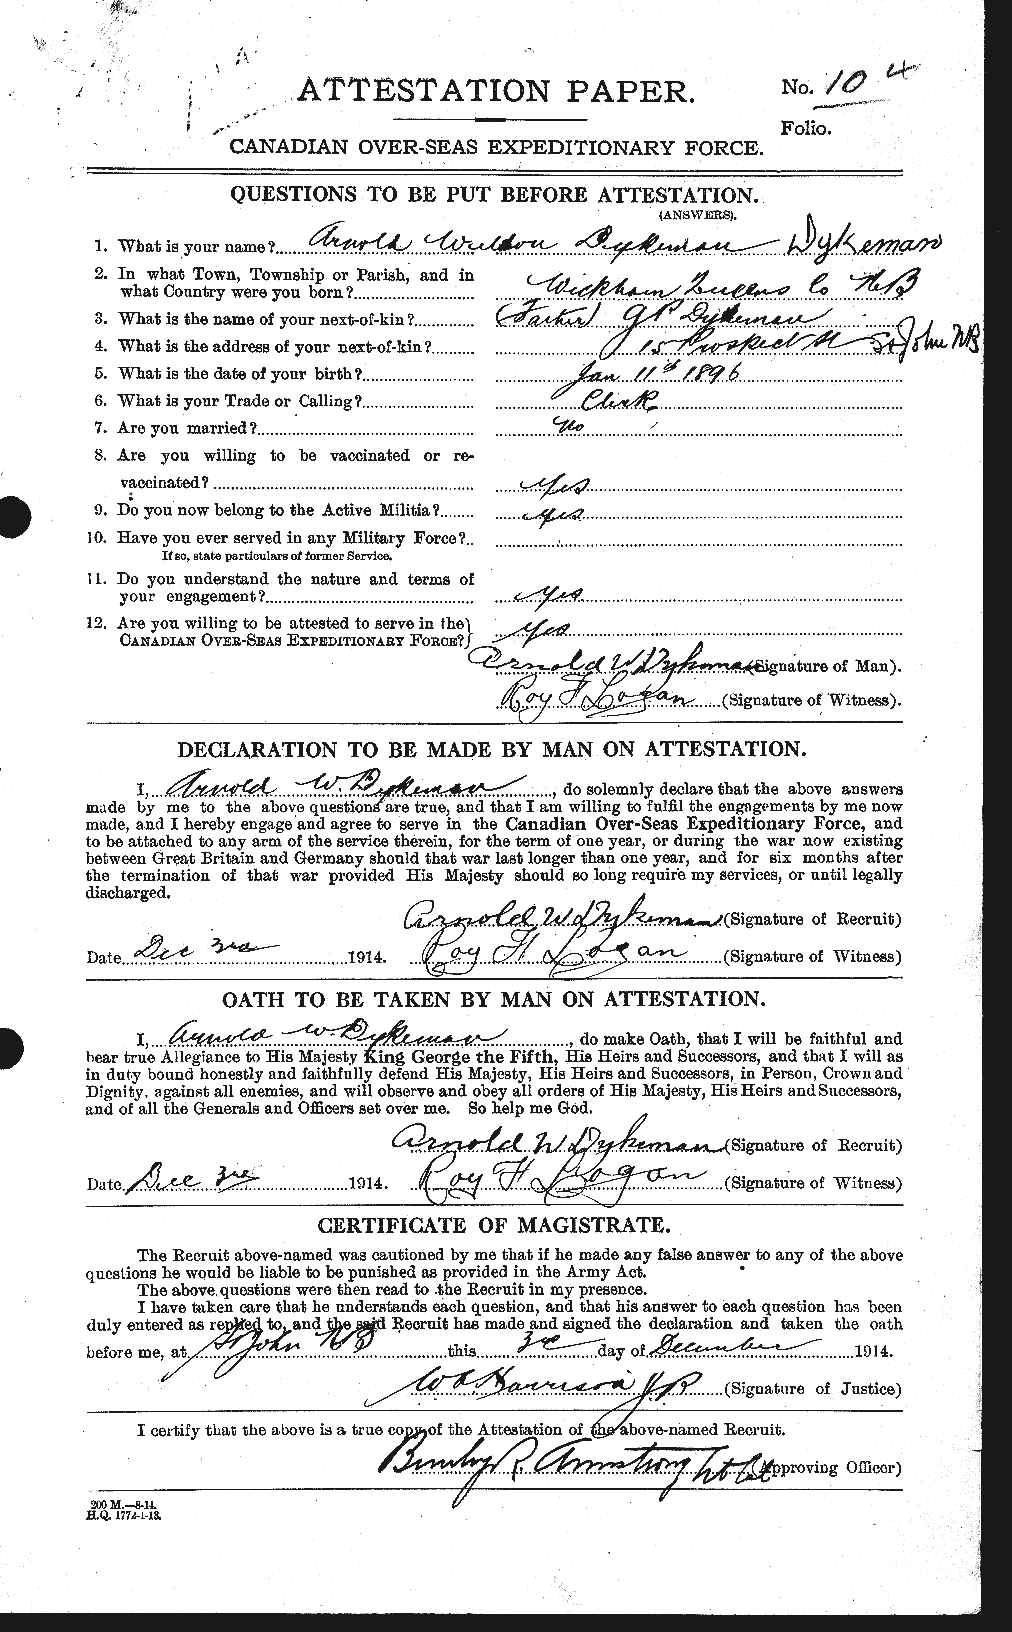 Personnel Records of the First World War - CEF 307247a